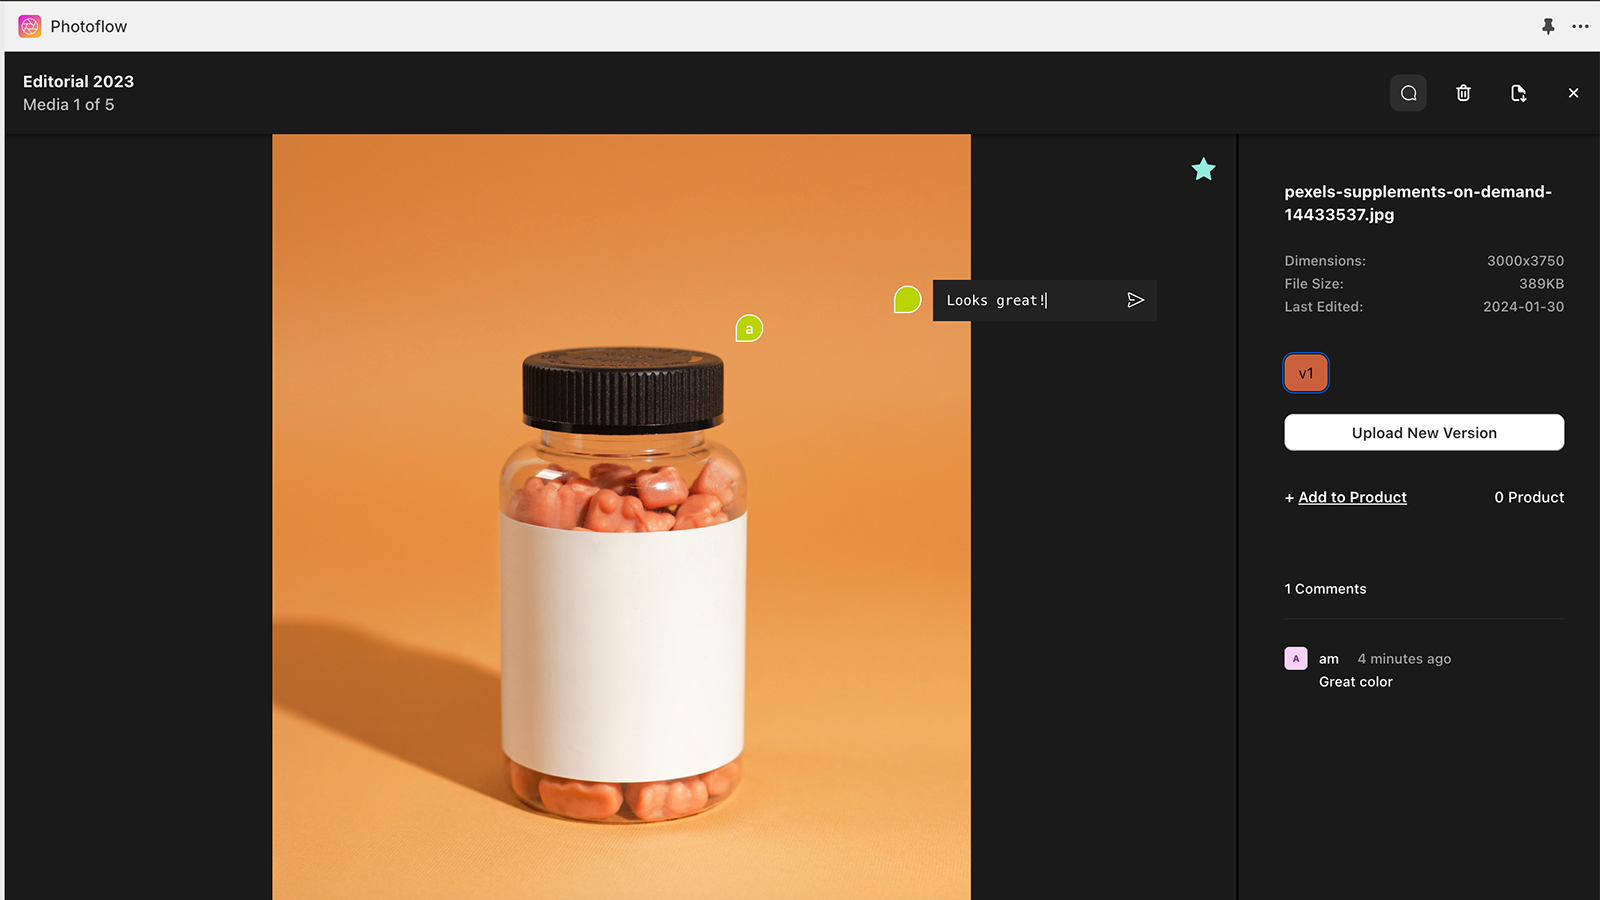 Shopify users can comment on images, with retouching notes